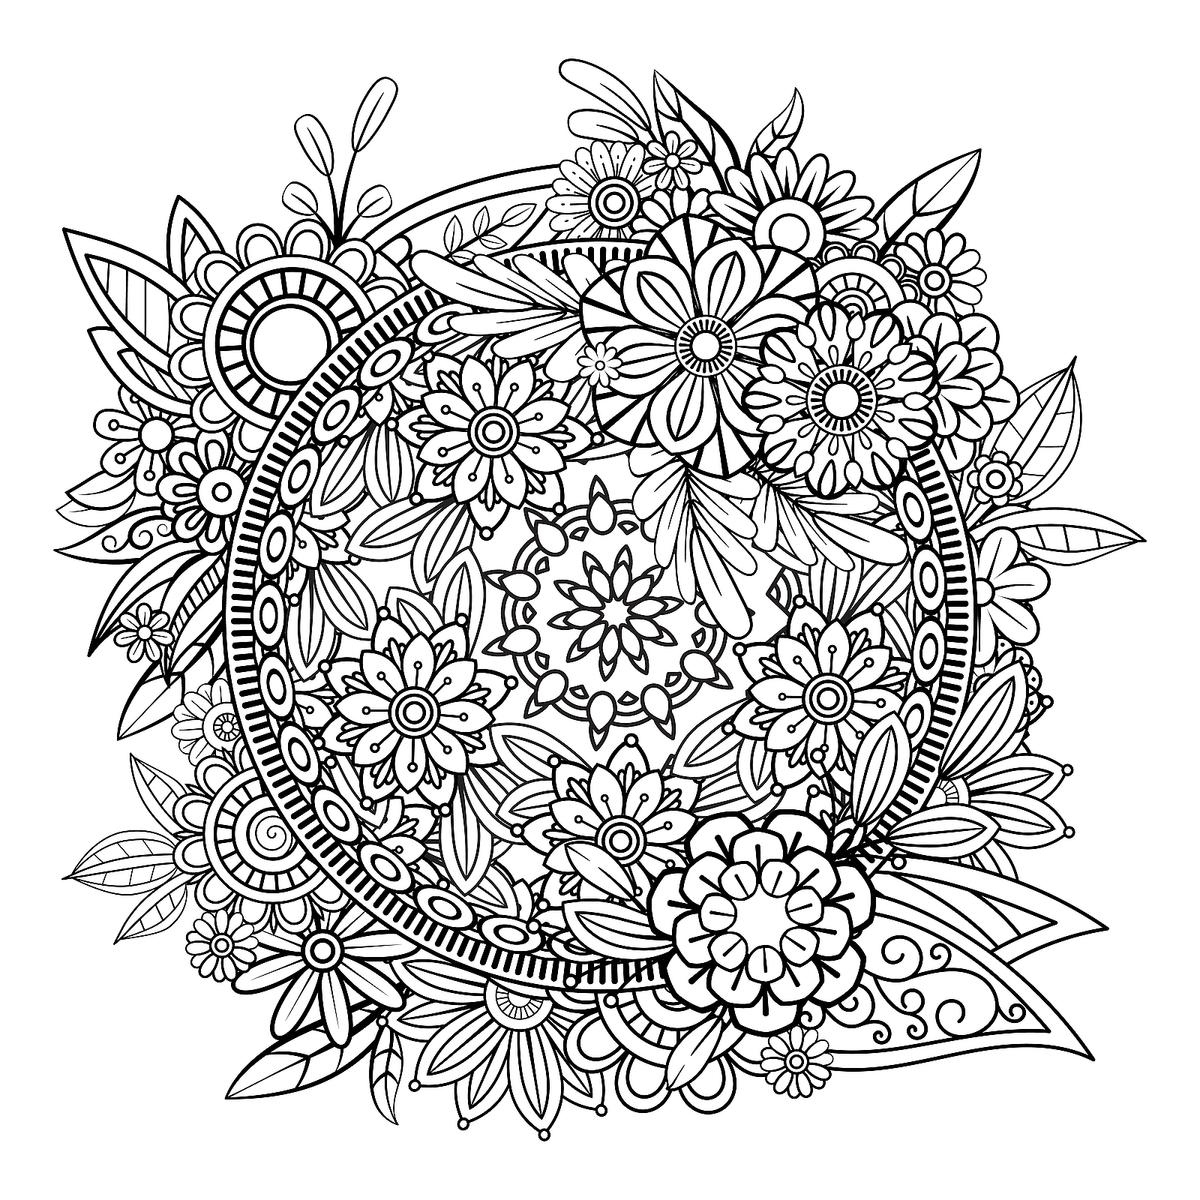 Mandala Coloring Pages: Free Printable Coloring Pages Of Mandalas with Free Printable Mandala Coloring Pages